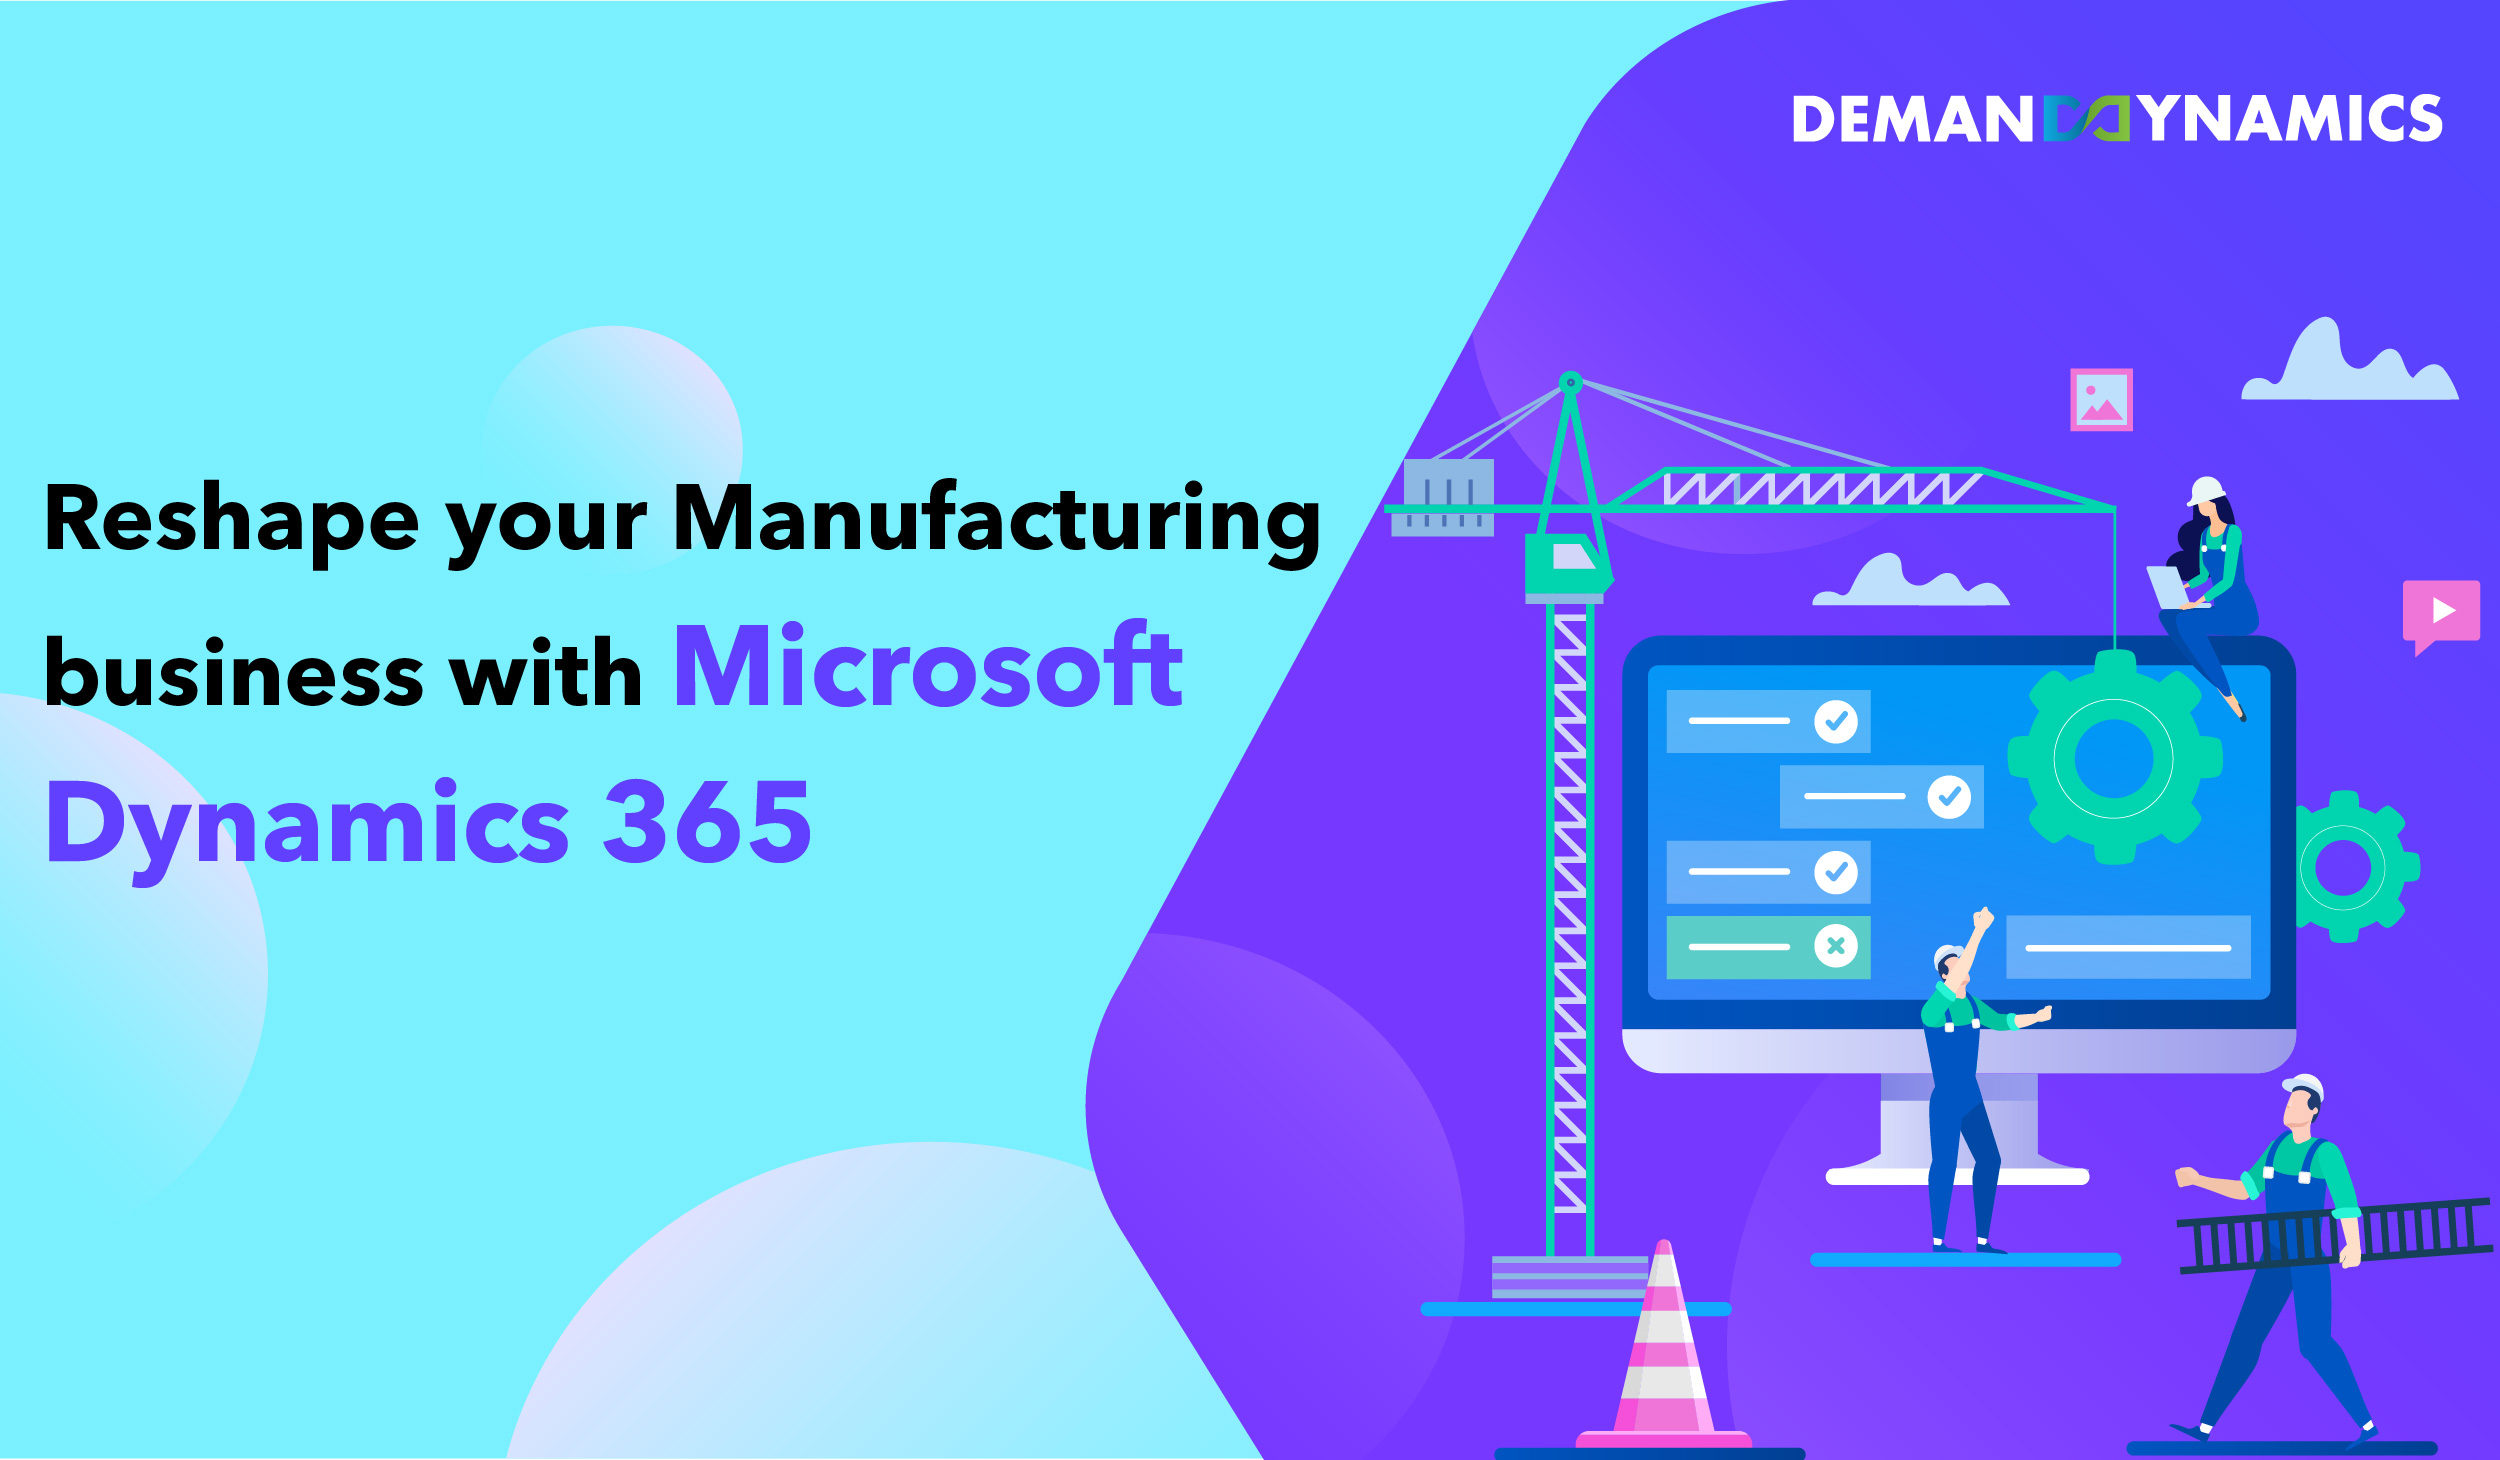 How to transform your Manufacturing Business with Microsoft Dynamics 365?